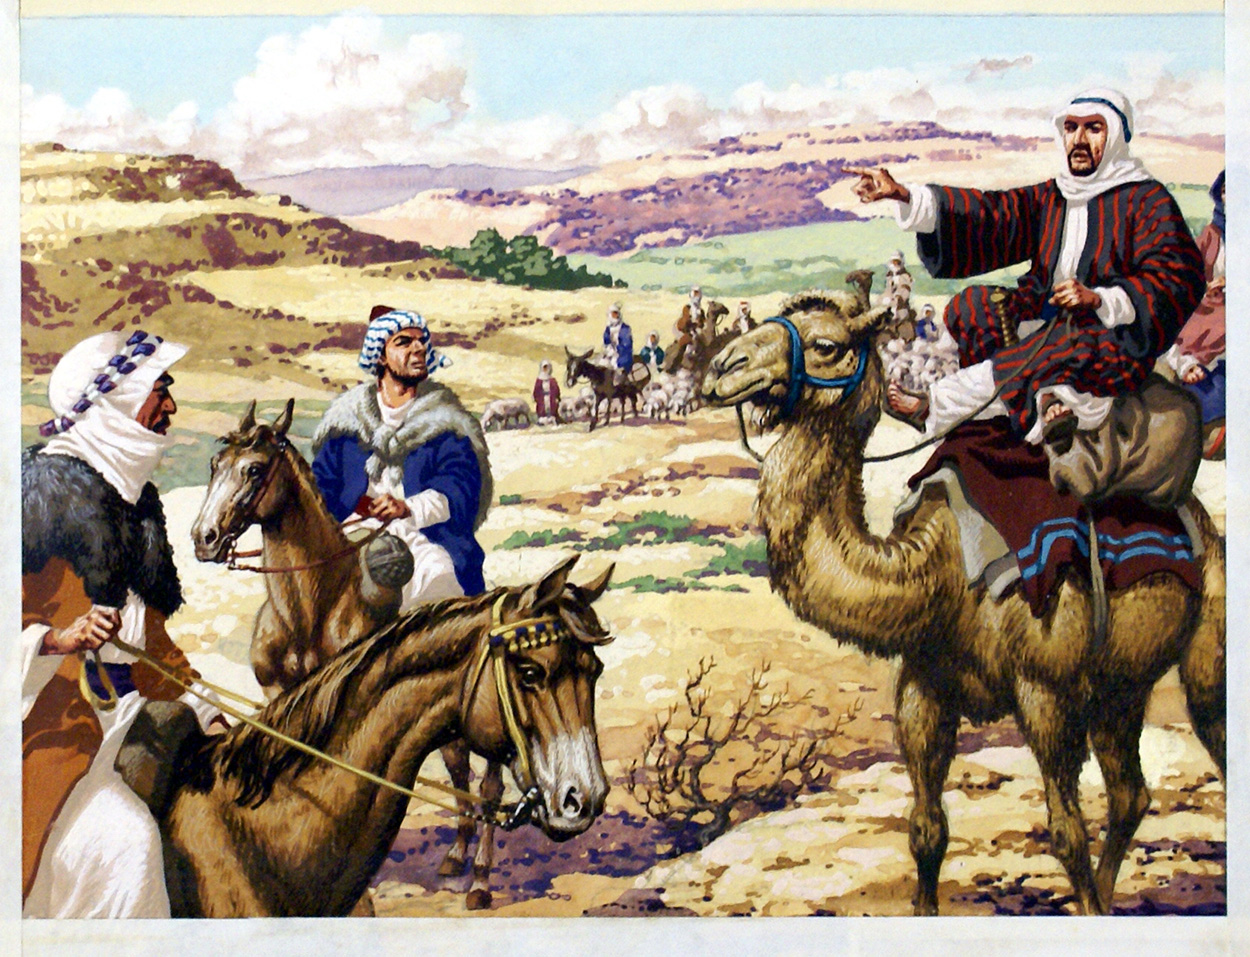 Biblical Camel scene (Original) art by Bible Stories (Pat Nicolle) at The Illustration Art Gallery